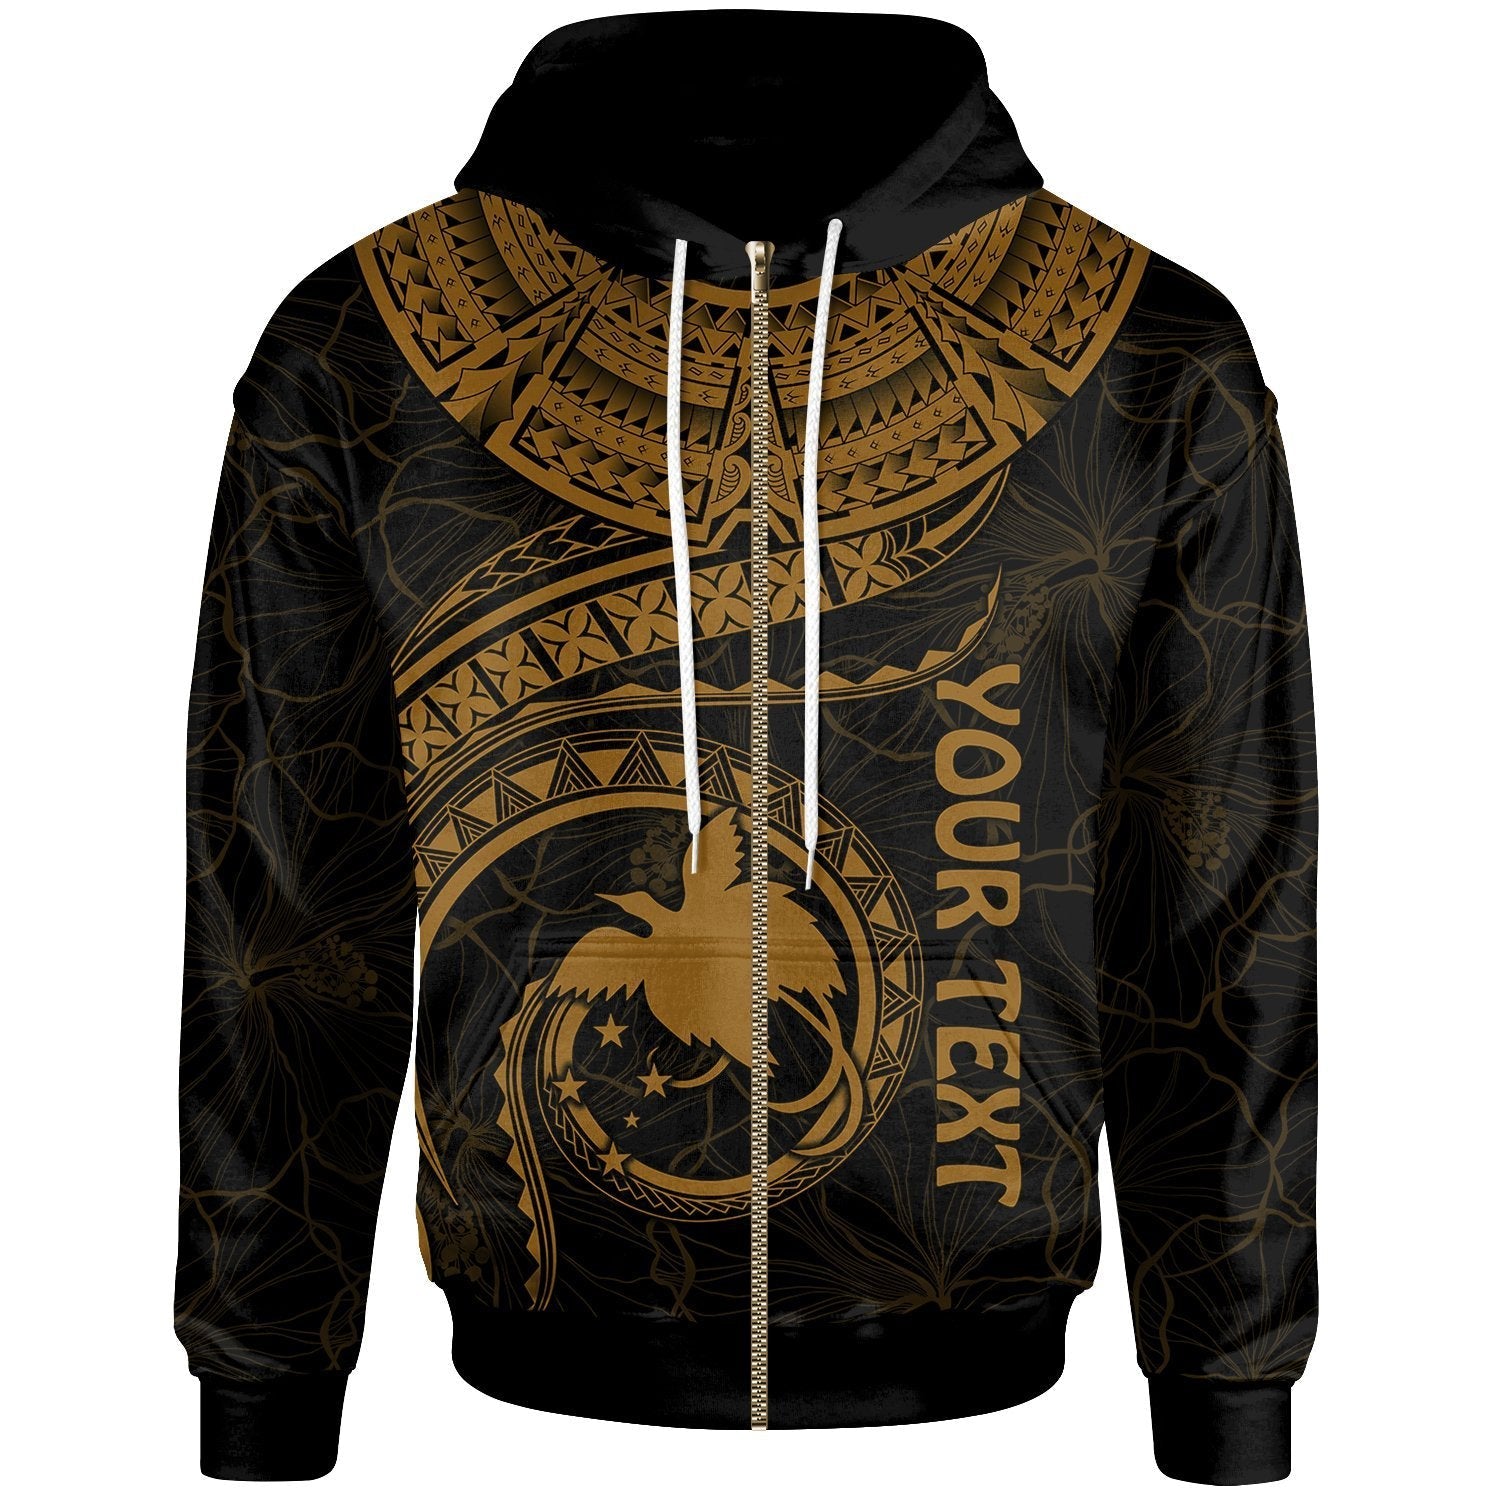 papua-new-guinea-polynesian-personalised-zip-up-hoodie-papua-new-guinea-waves-golden